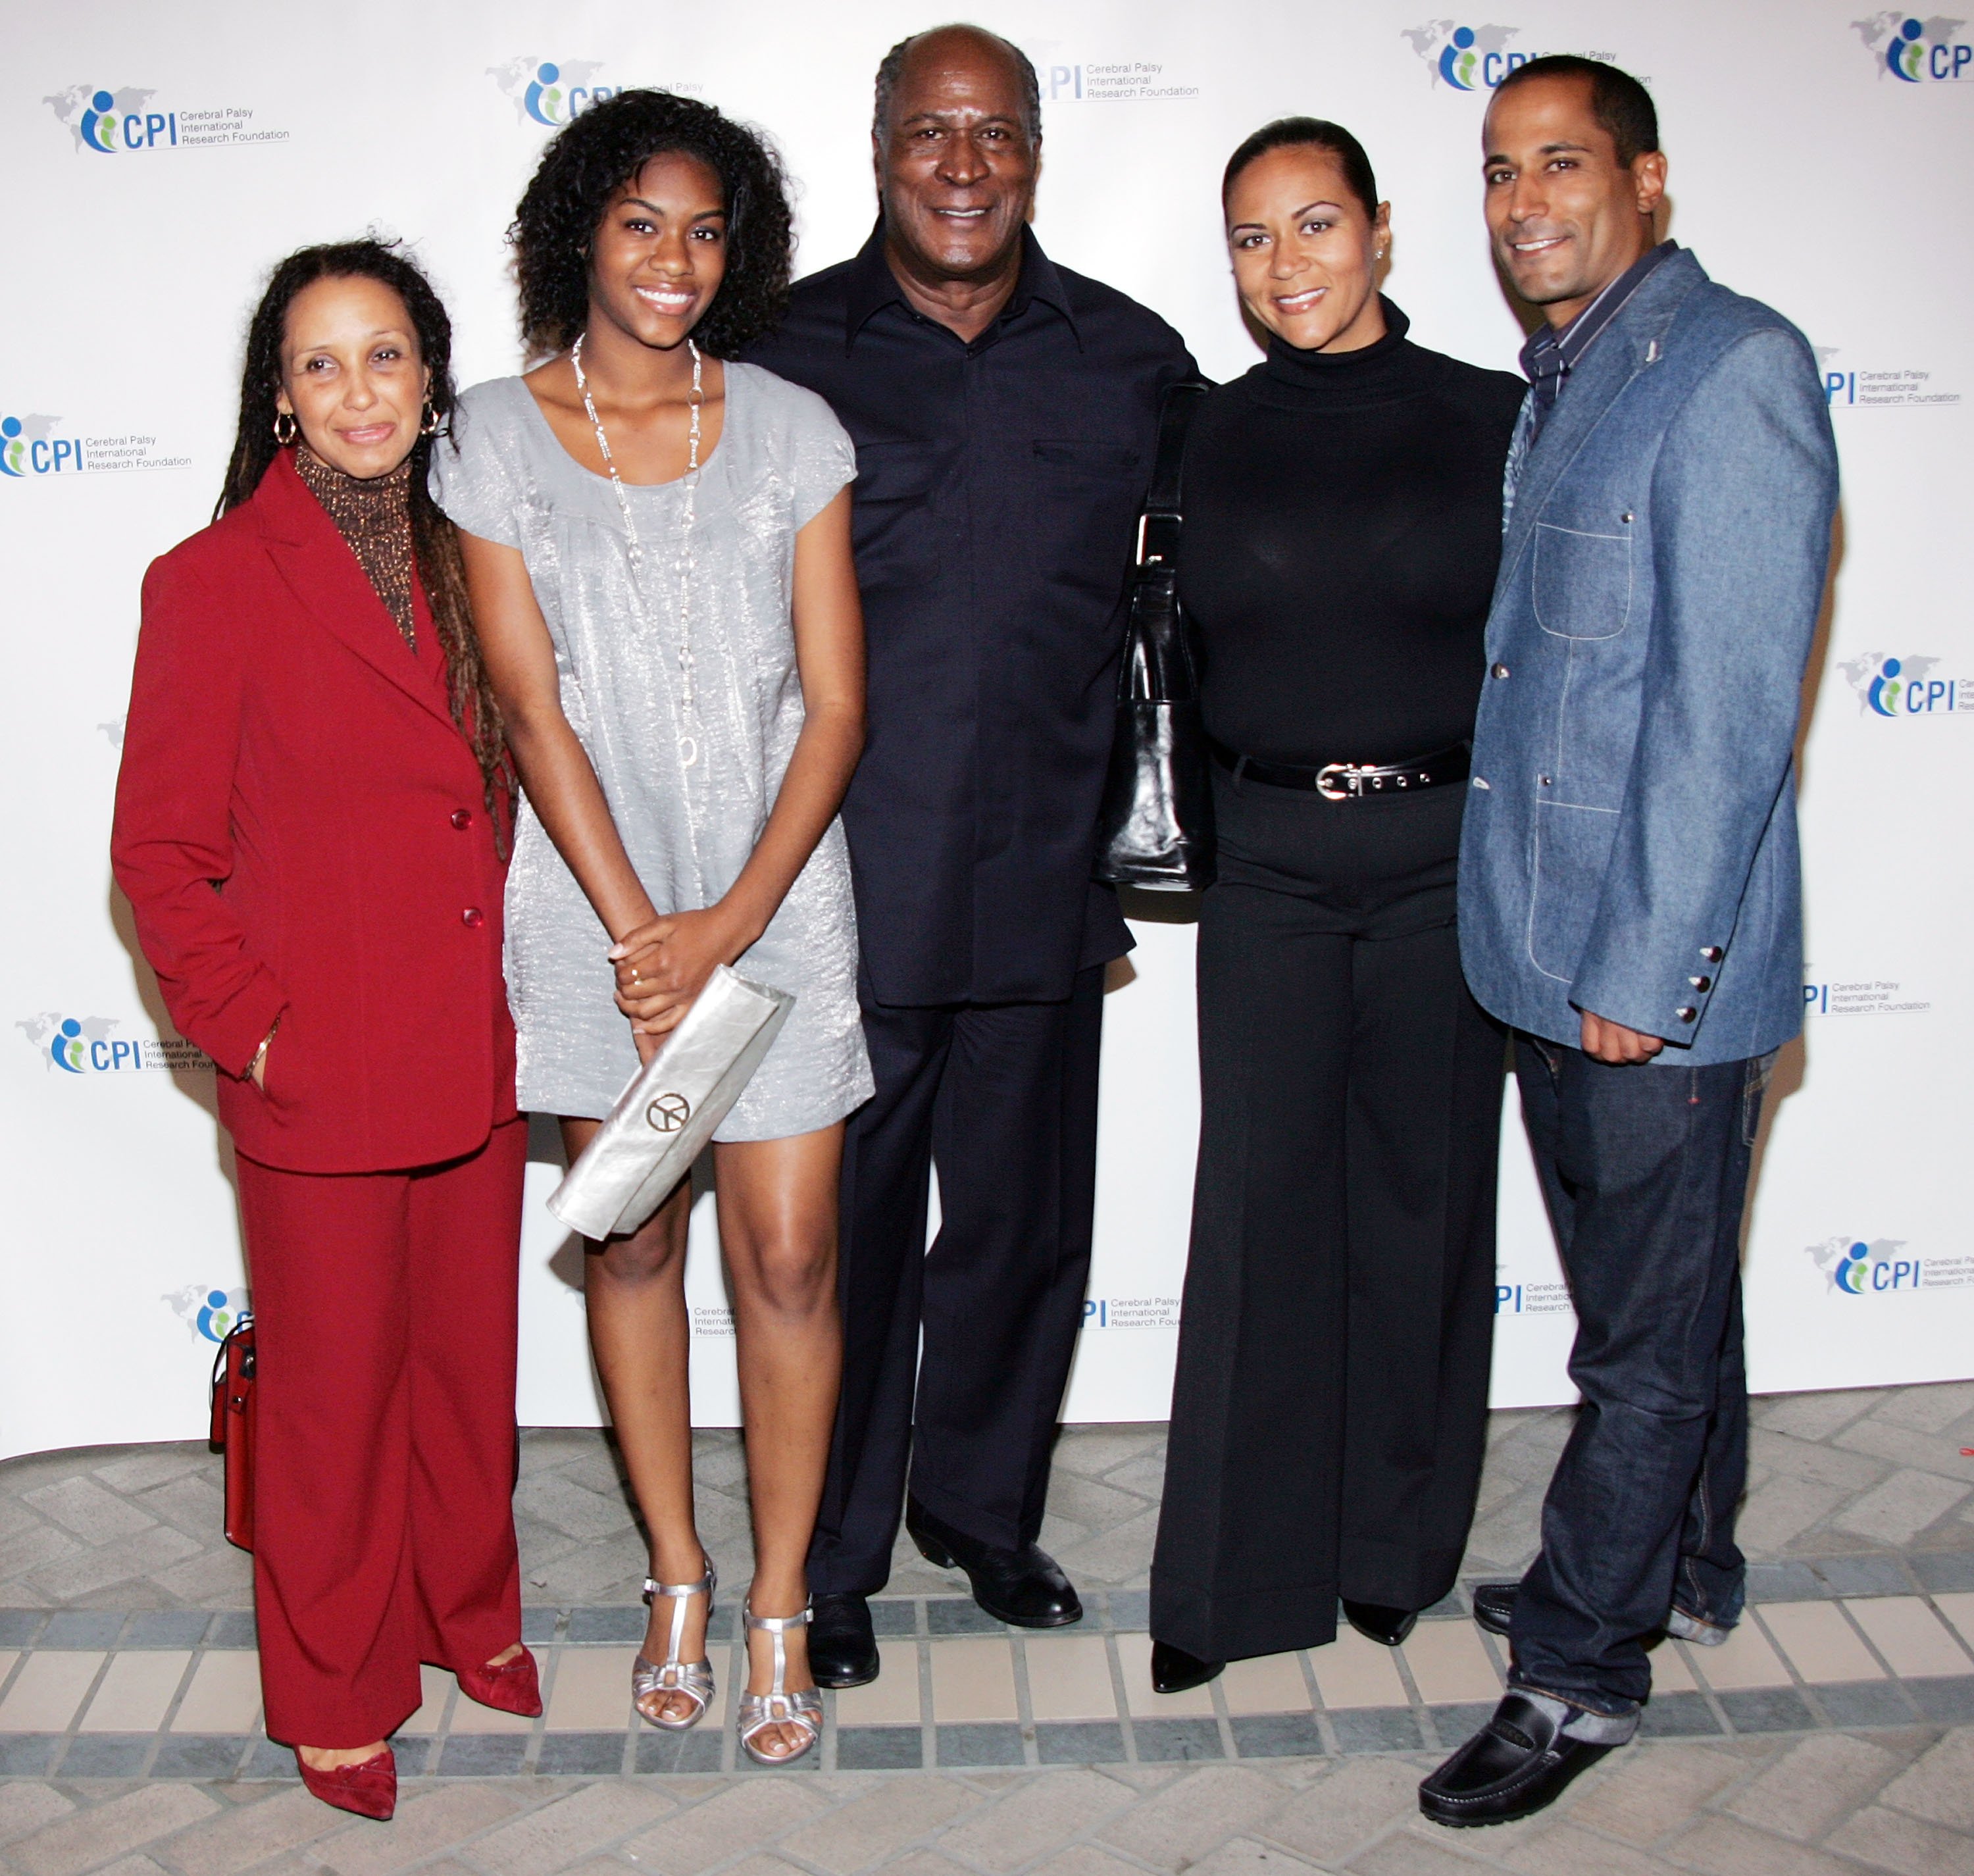 John Amos, Shannon Amos, K.C. Amos and friends in Los Angeles on December 3, 2008. | Photo: Getty Images